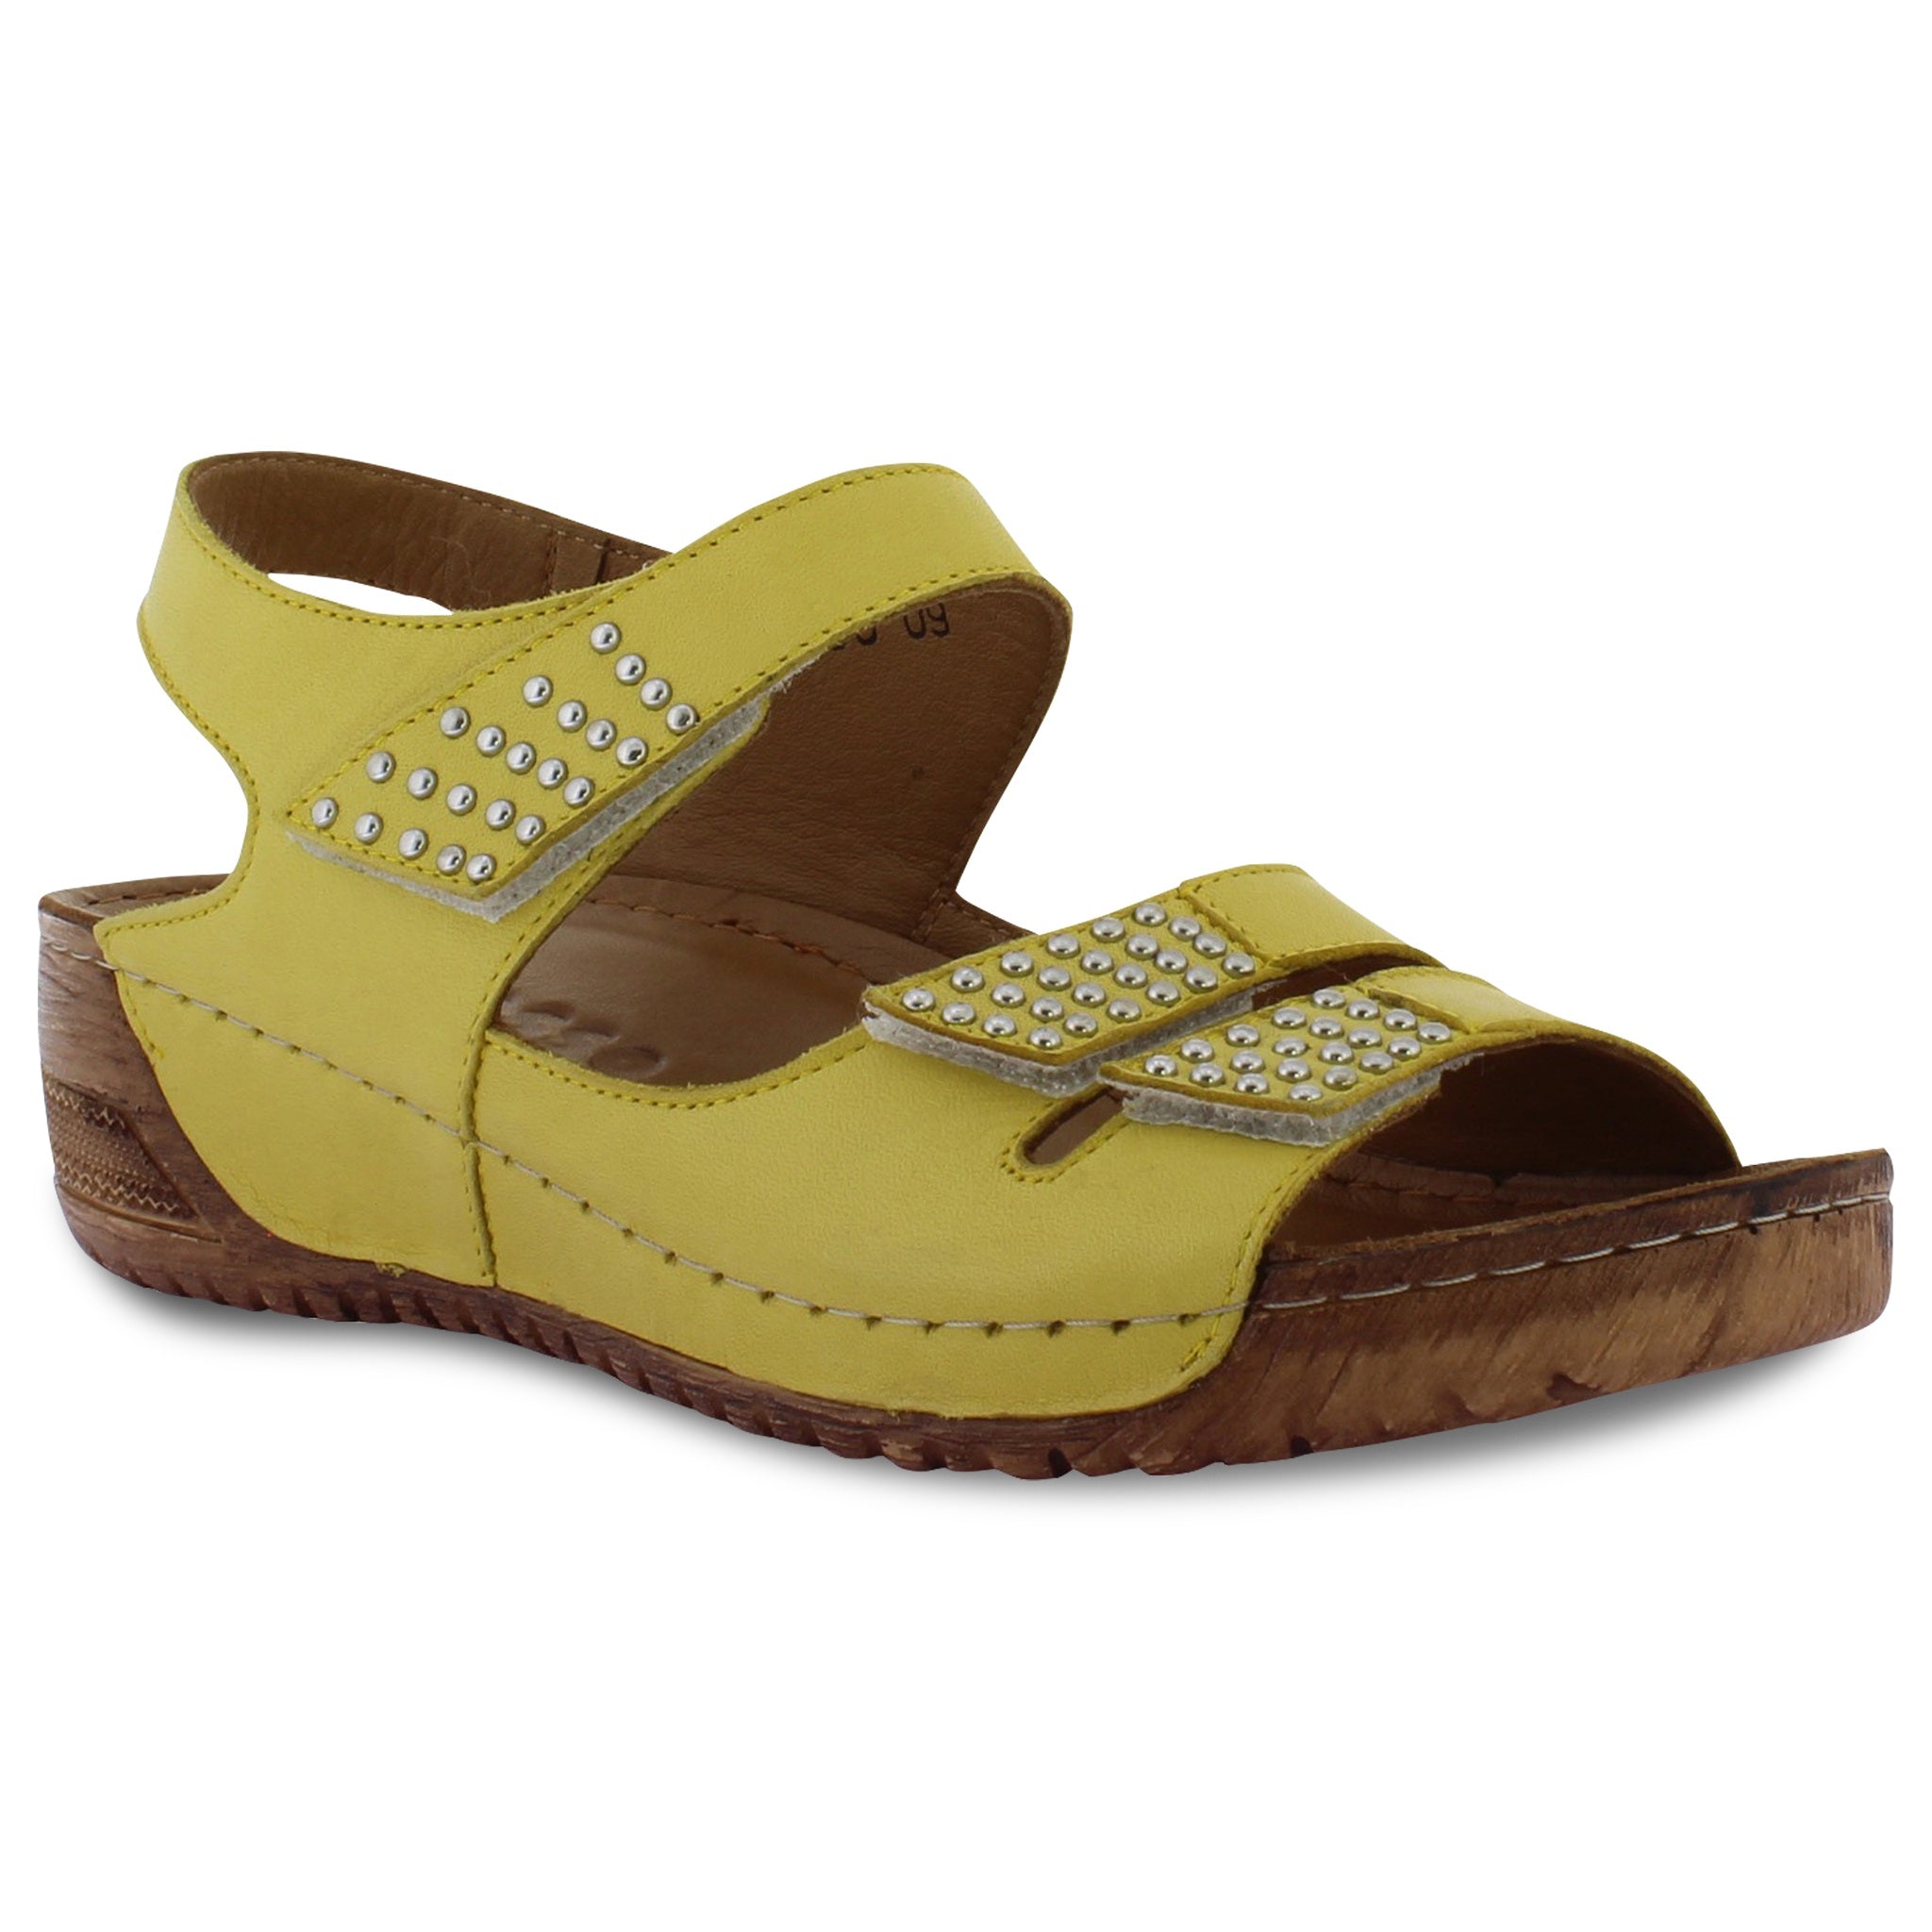 Buy quality Loretta - YELLOW Wedge Sandals from Adesso